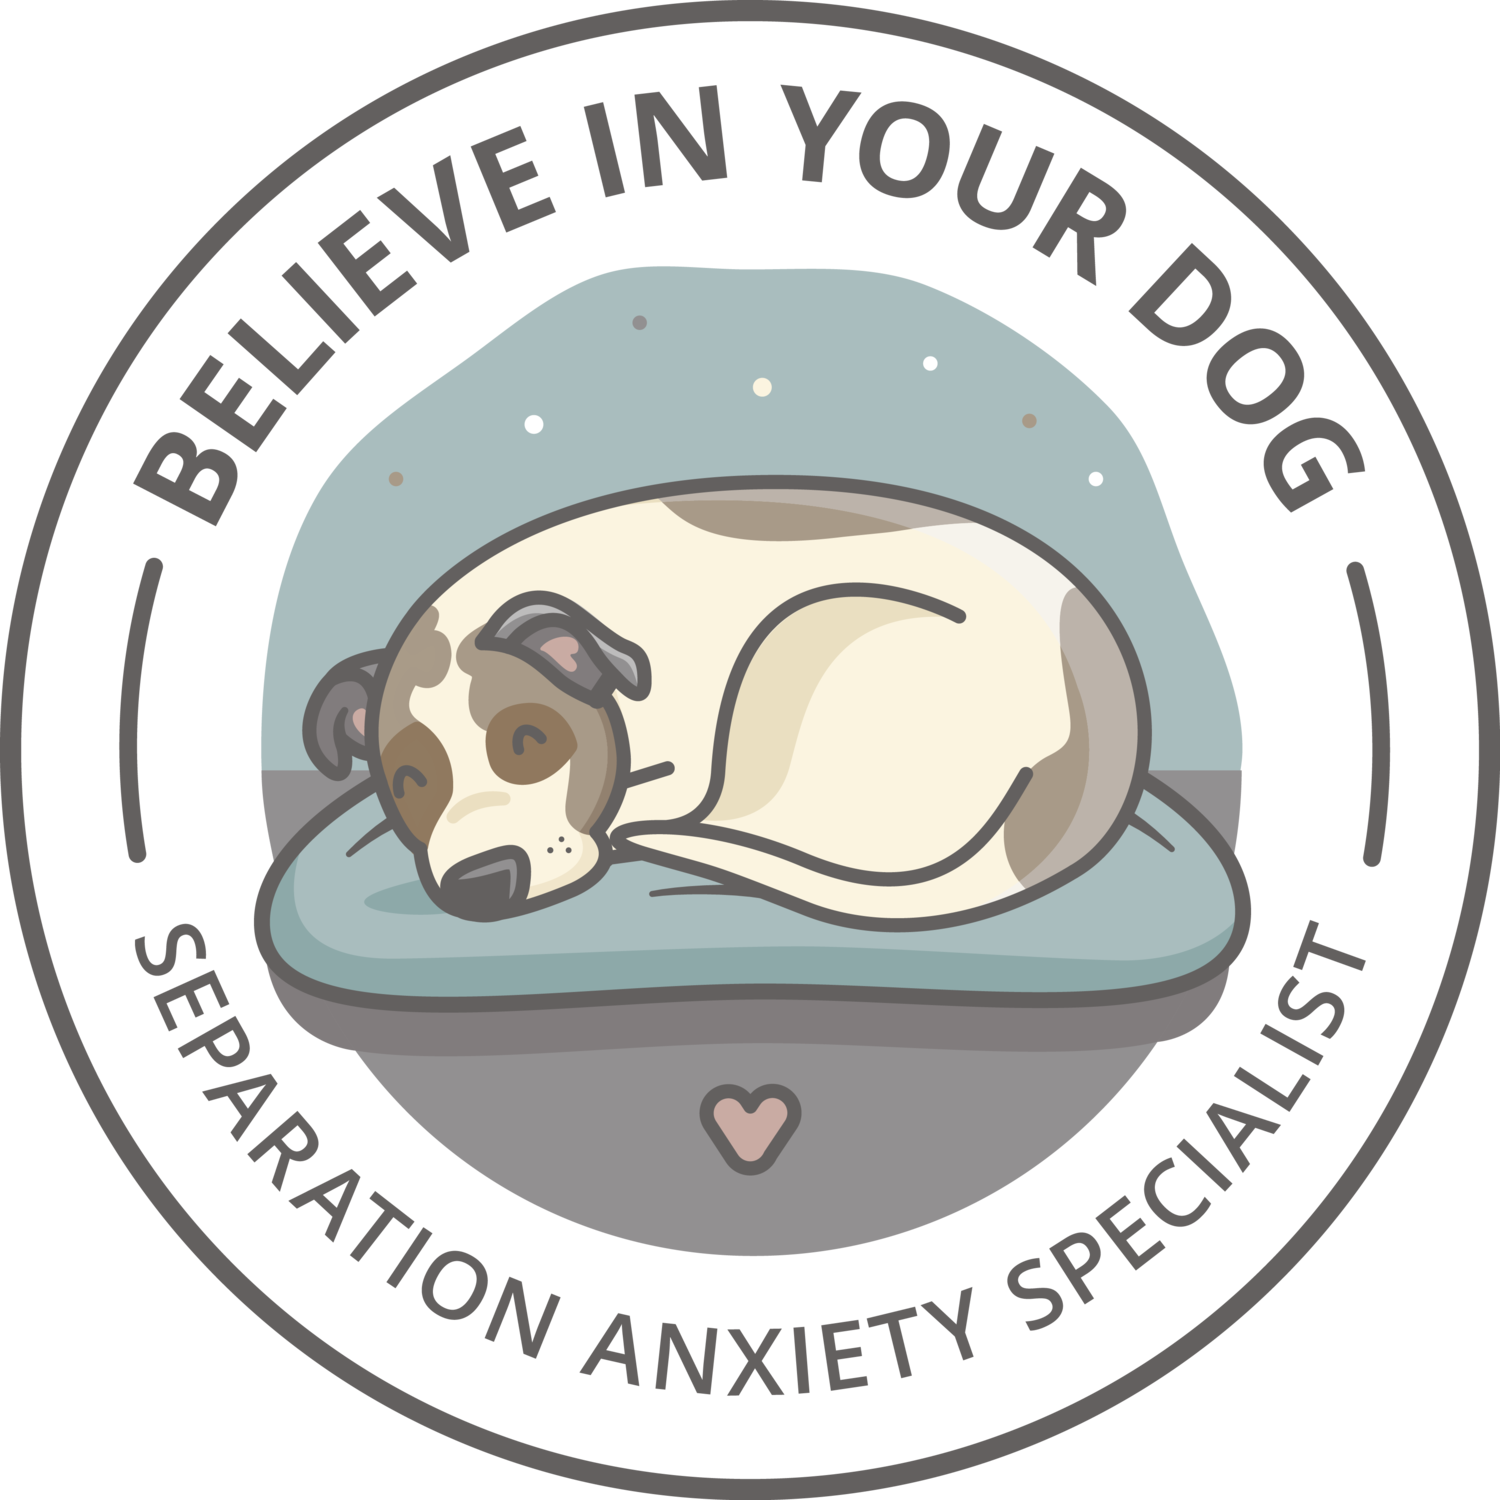 Believe in Your Dog